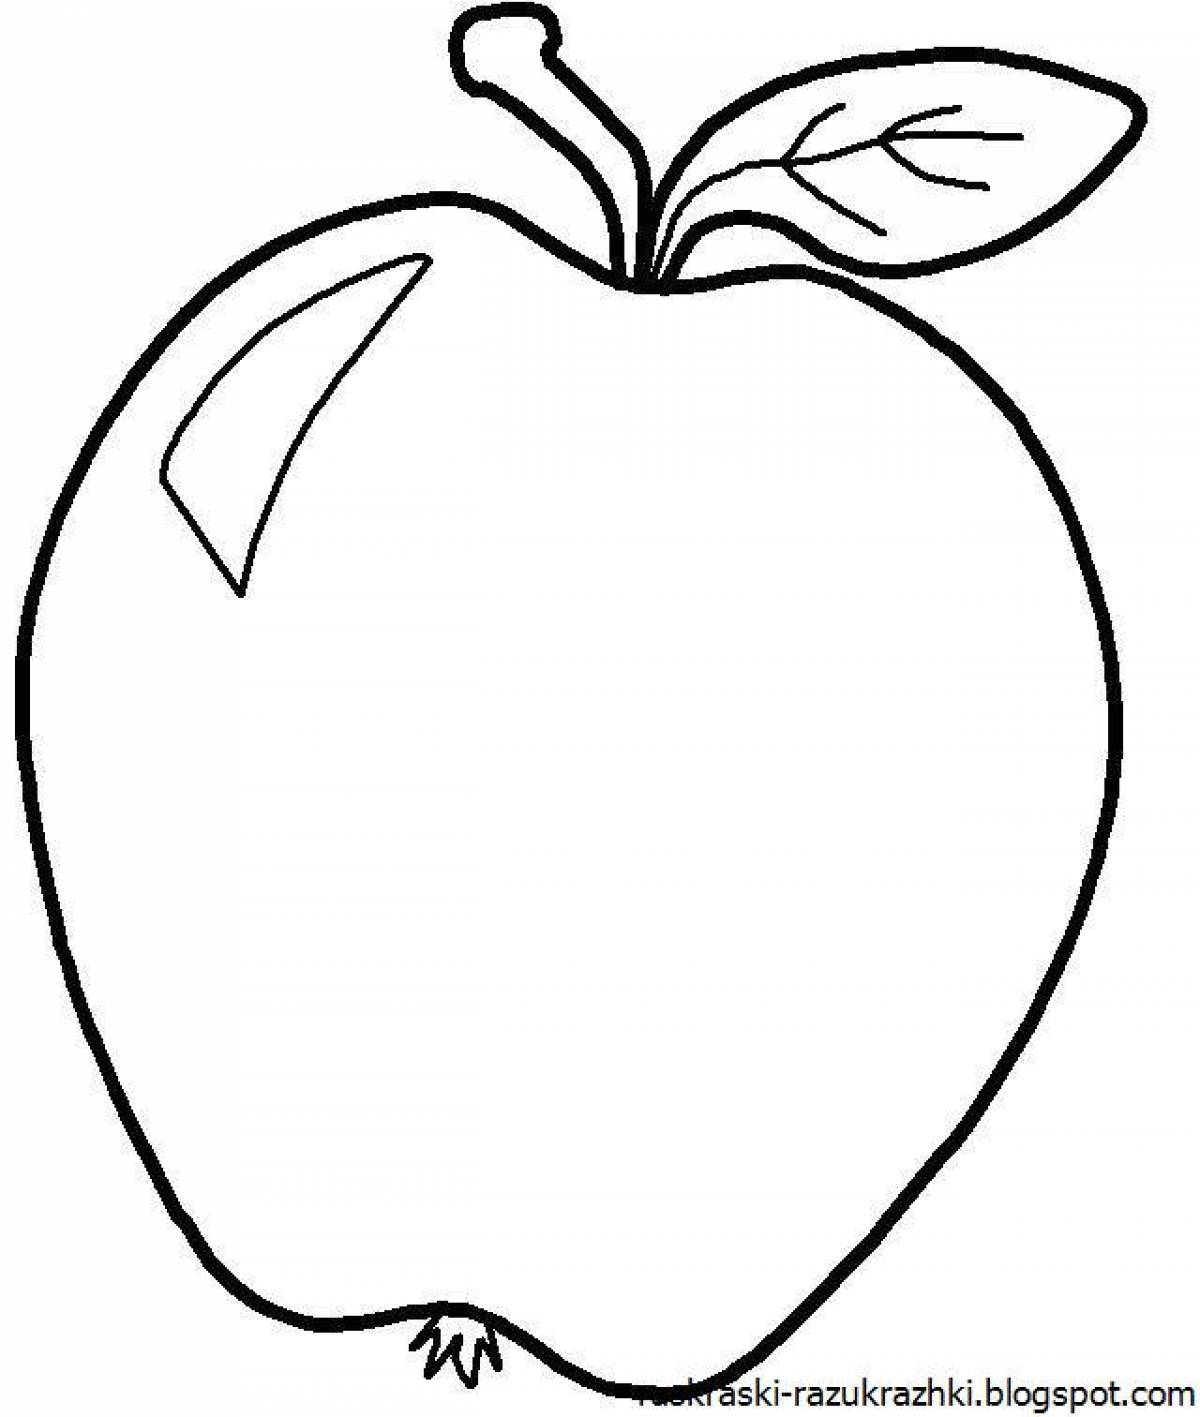 Coloring book shining apple for preschoolers